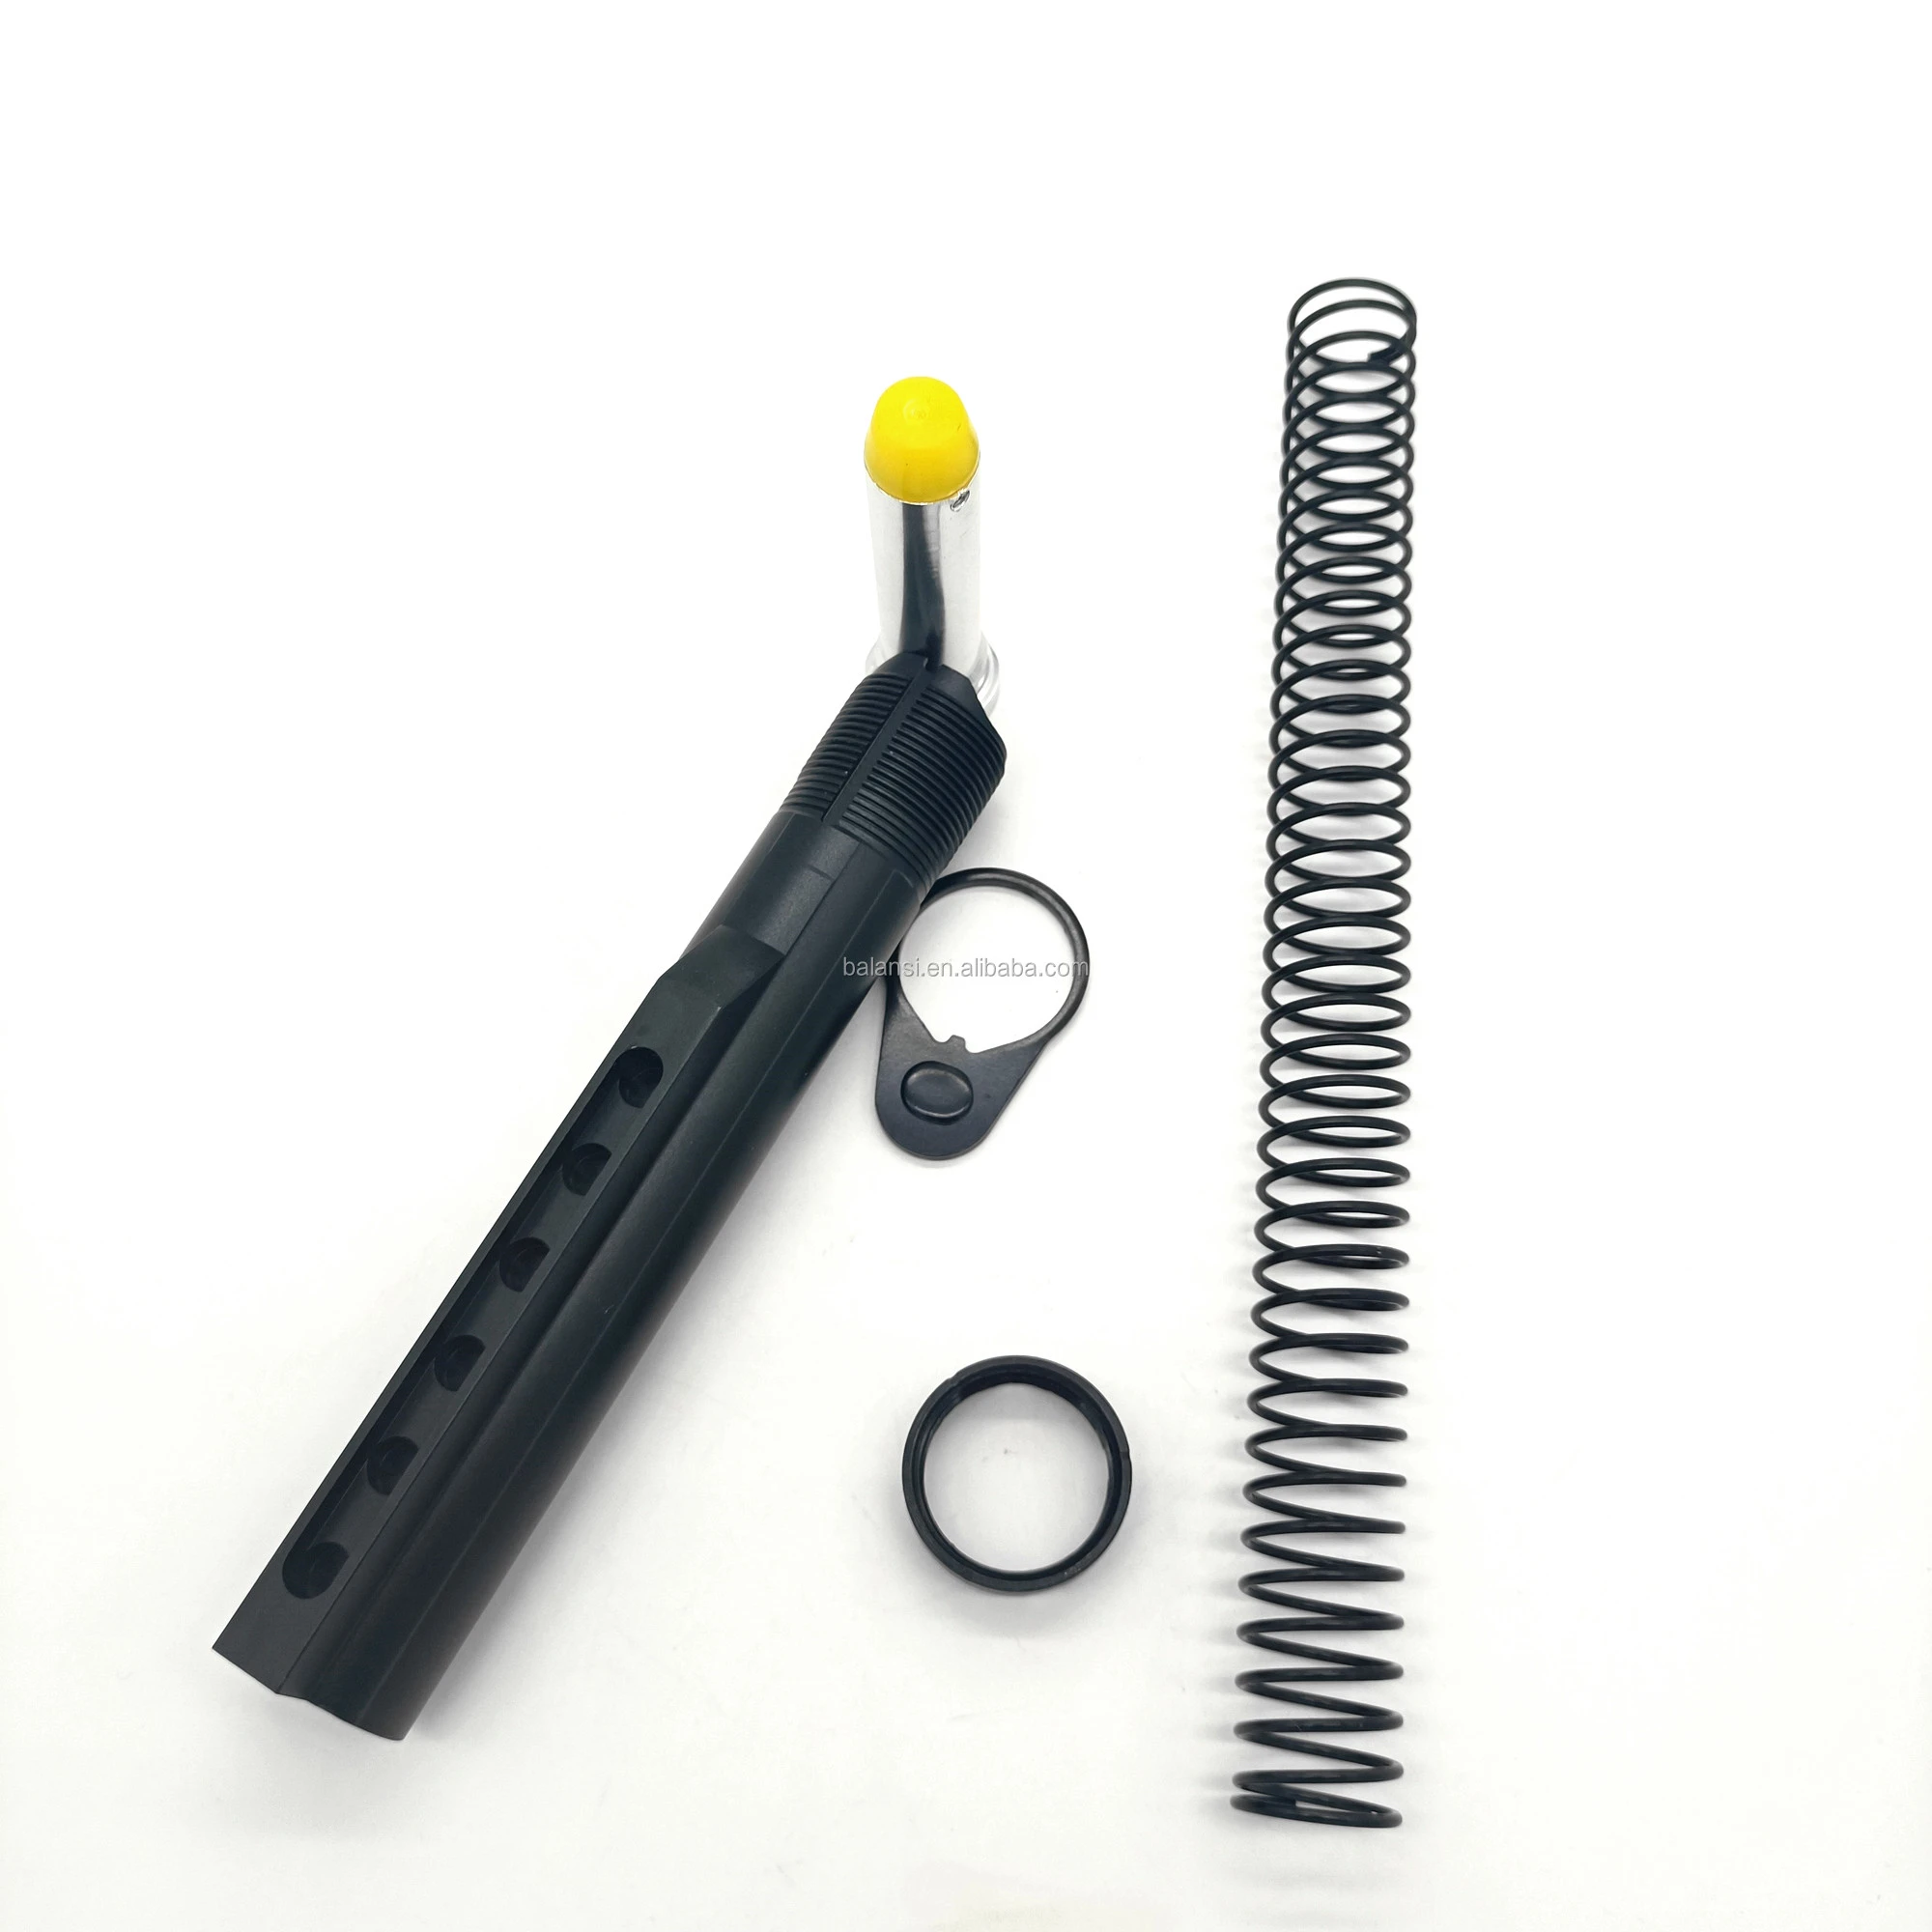 Tactical AR15 Latch Mil Spec 6 Position Buffer tube kit Extension Rod Assembly 5 Items End Plate Spring Nut Hunting Accessories